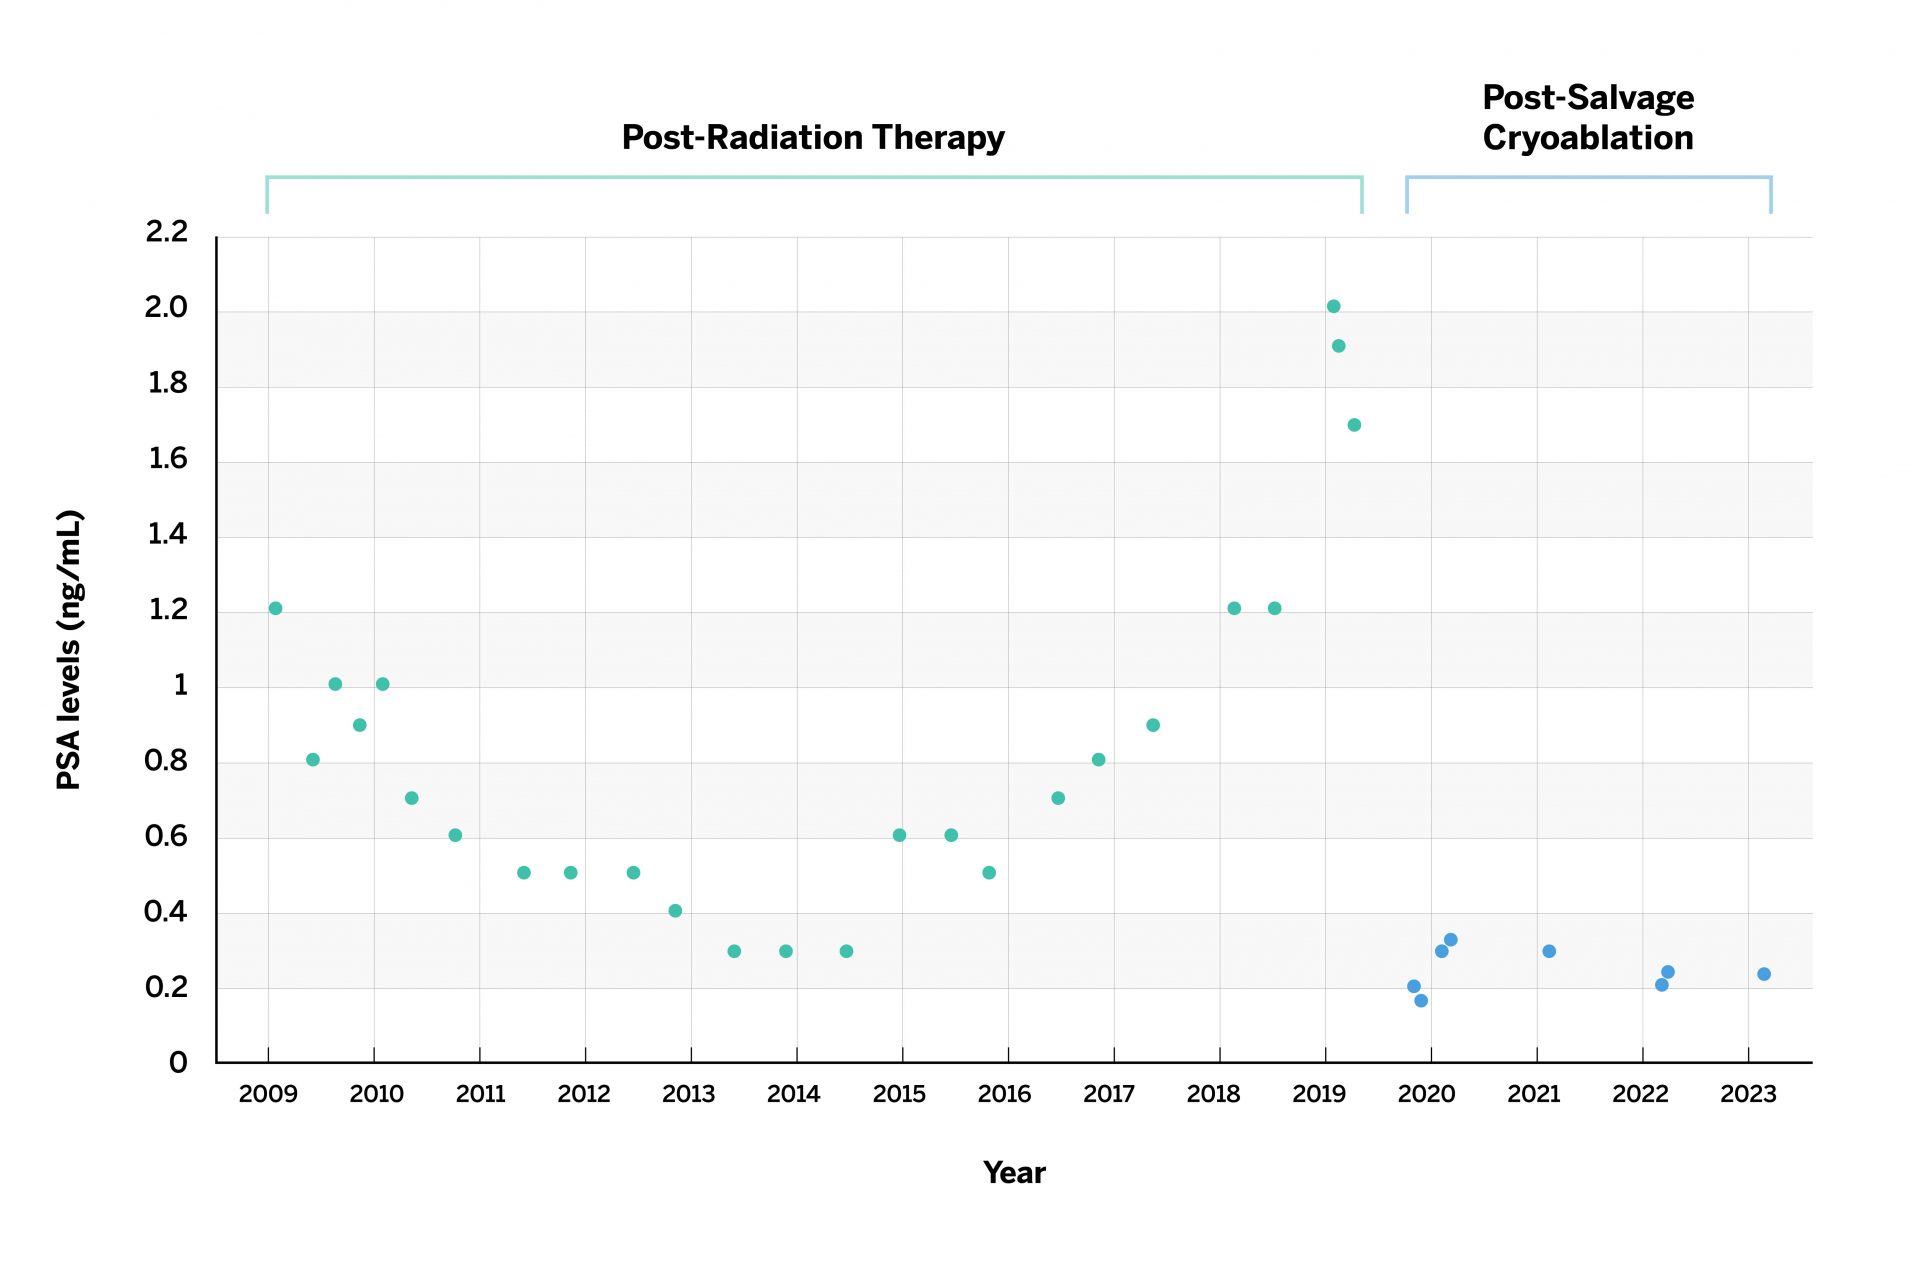 Patient’s PSA Levels Post-Radiation Therapy and PSA Levels Post-Salvage Cryoablation